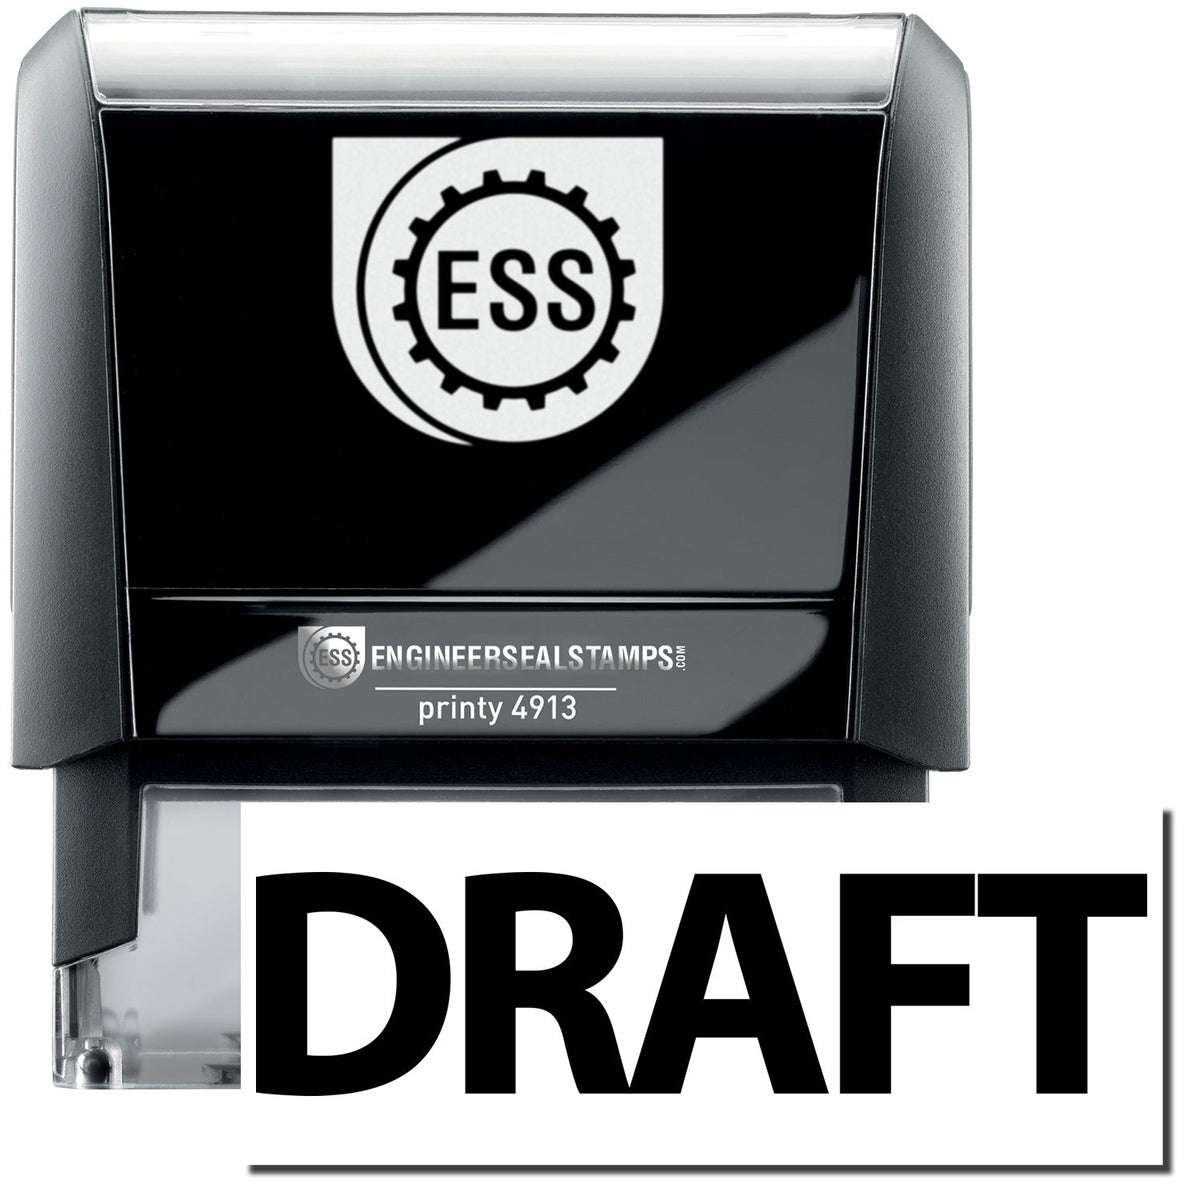 A self-inking stamp with a stamped image showing how the text &quot;DRAFT&quot; in a large bold font is displayed by it after stamping.